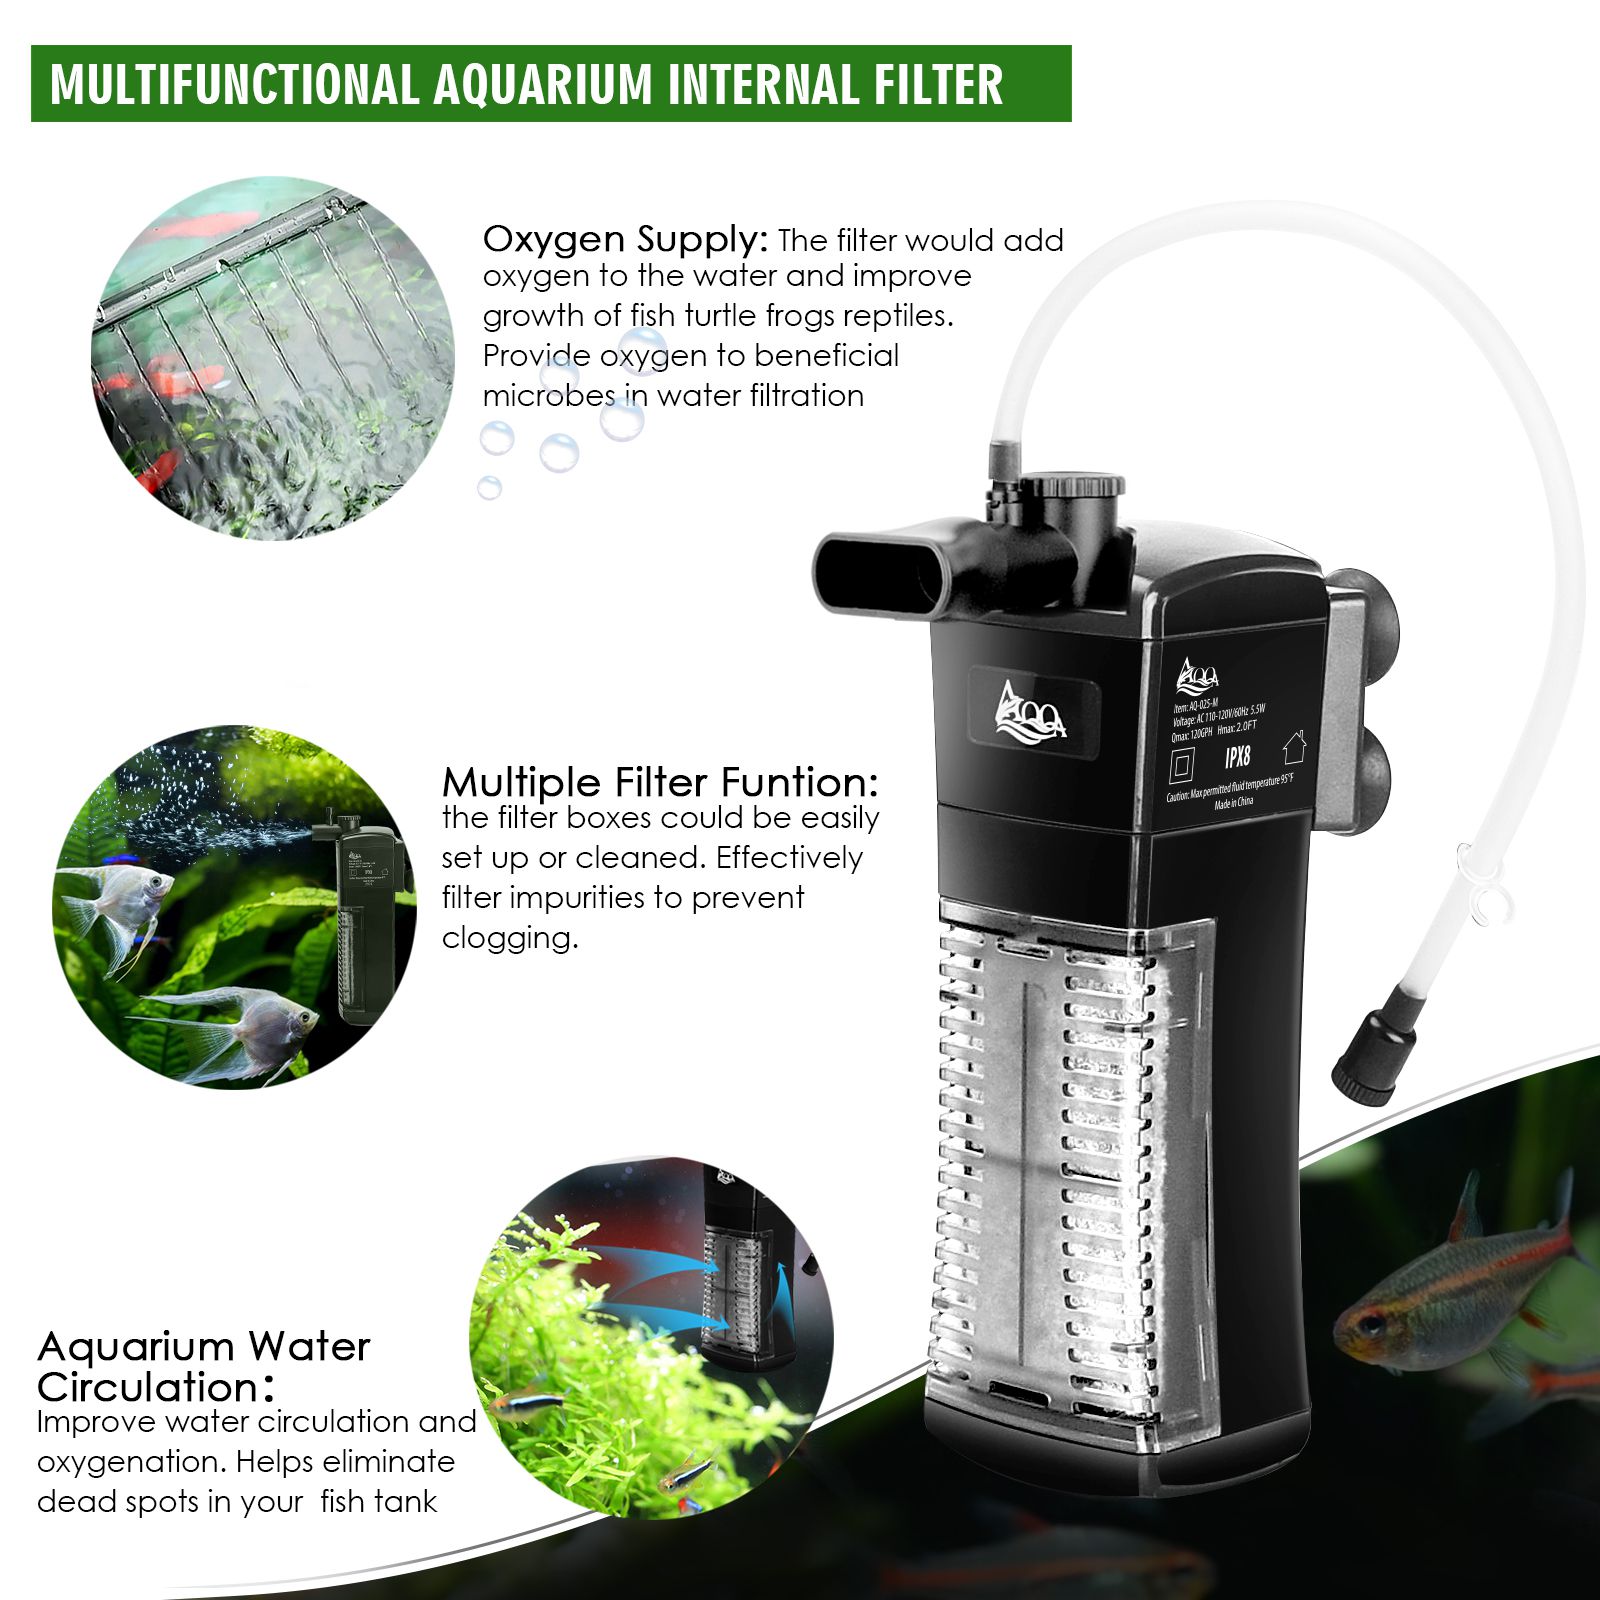 AQQA Aquarium Internal Filter, Submersible Power Filter in-Tank with Adjustable Water Flow, Ultra Silent Biochemical Sponge Filtration for Fish Tank Water Clean - AQQA-Make fish keeping